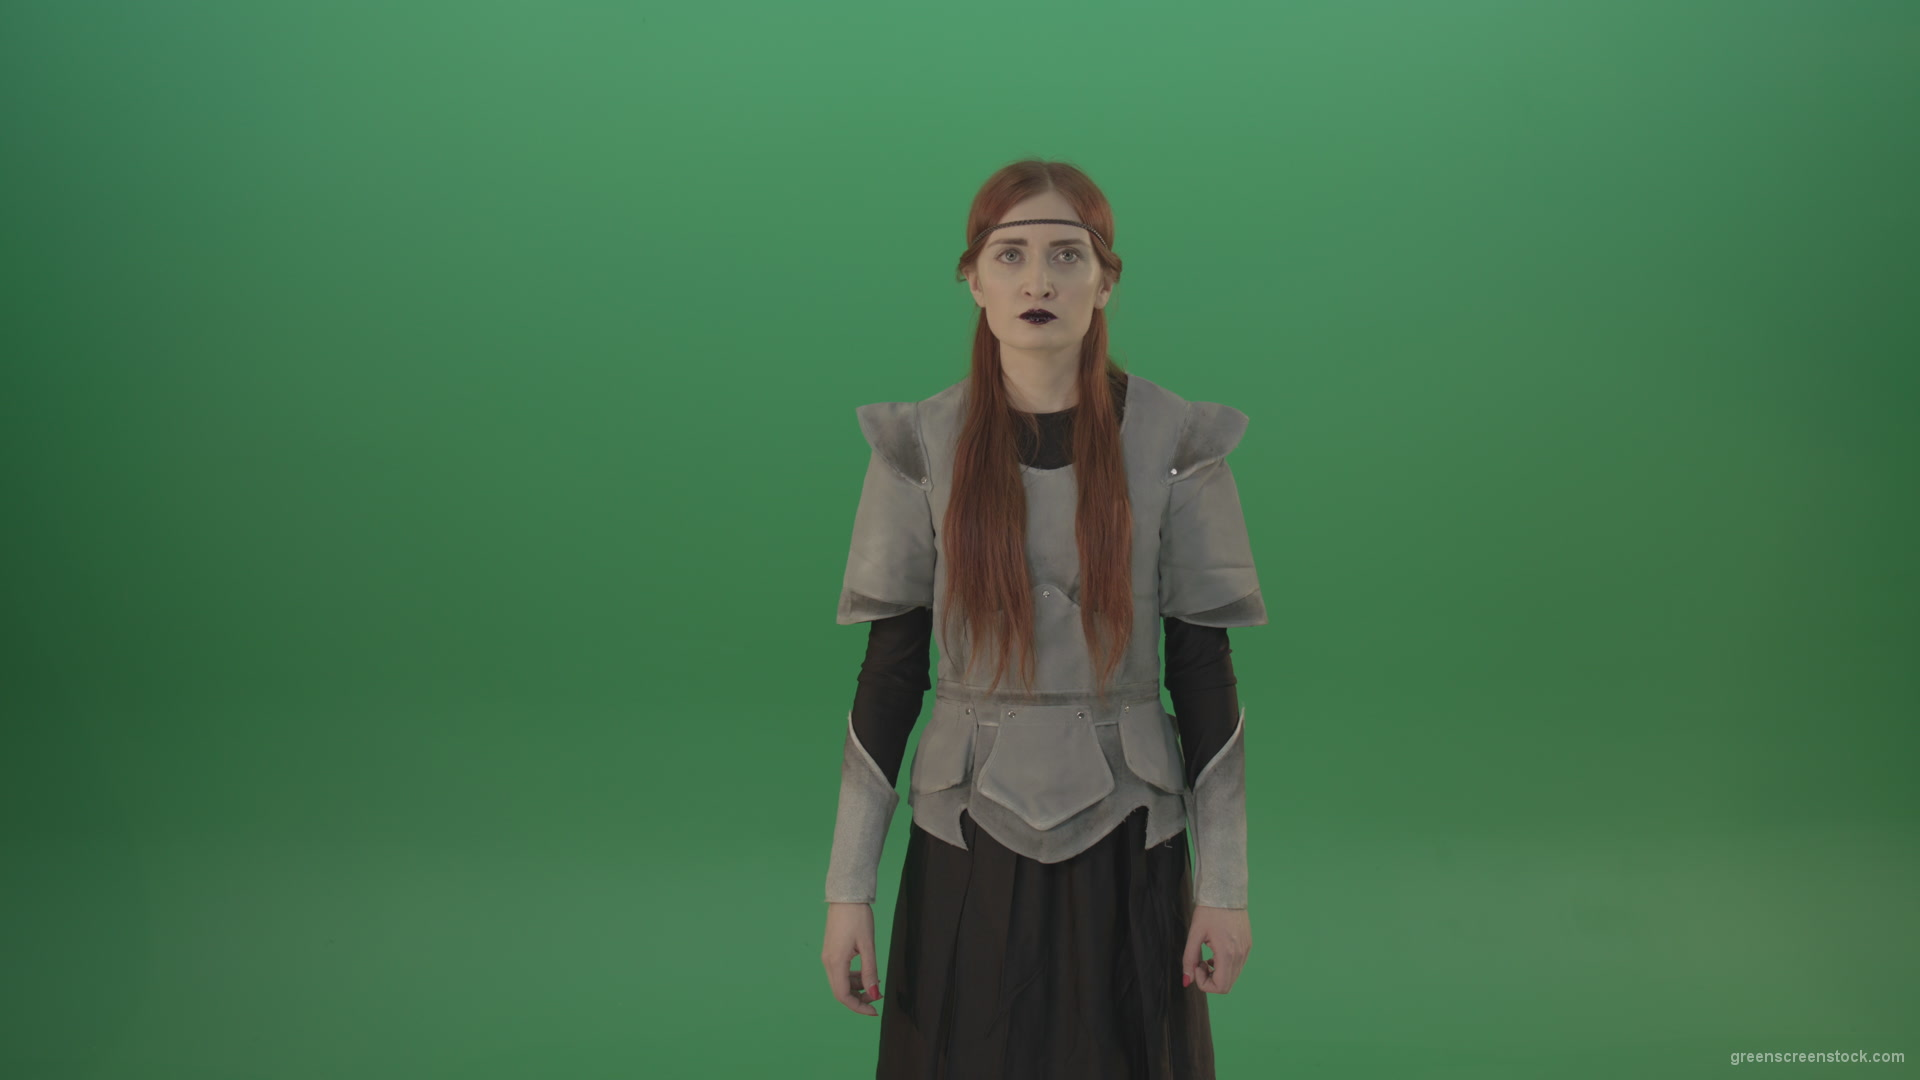 Cried-warrior-girl-releases-all-her-energy-cosplay-on-a-green-background_001 Green Screen Stock